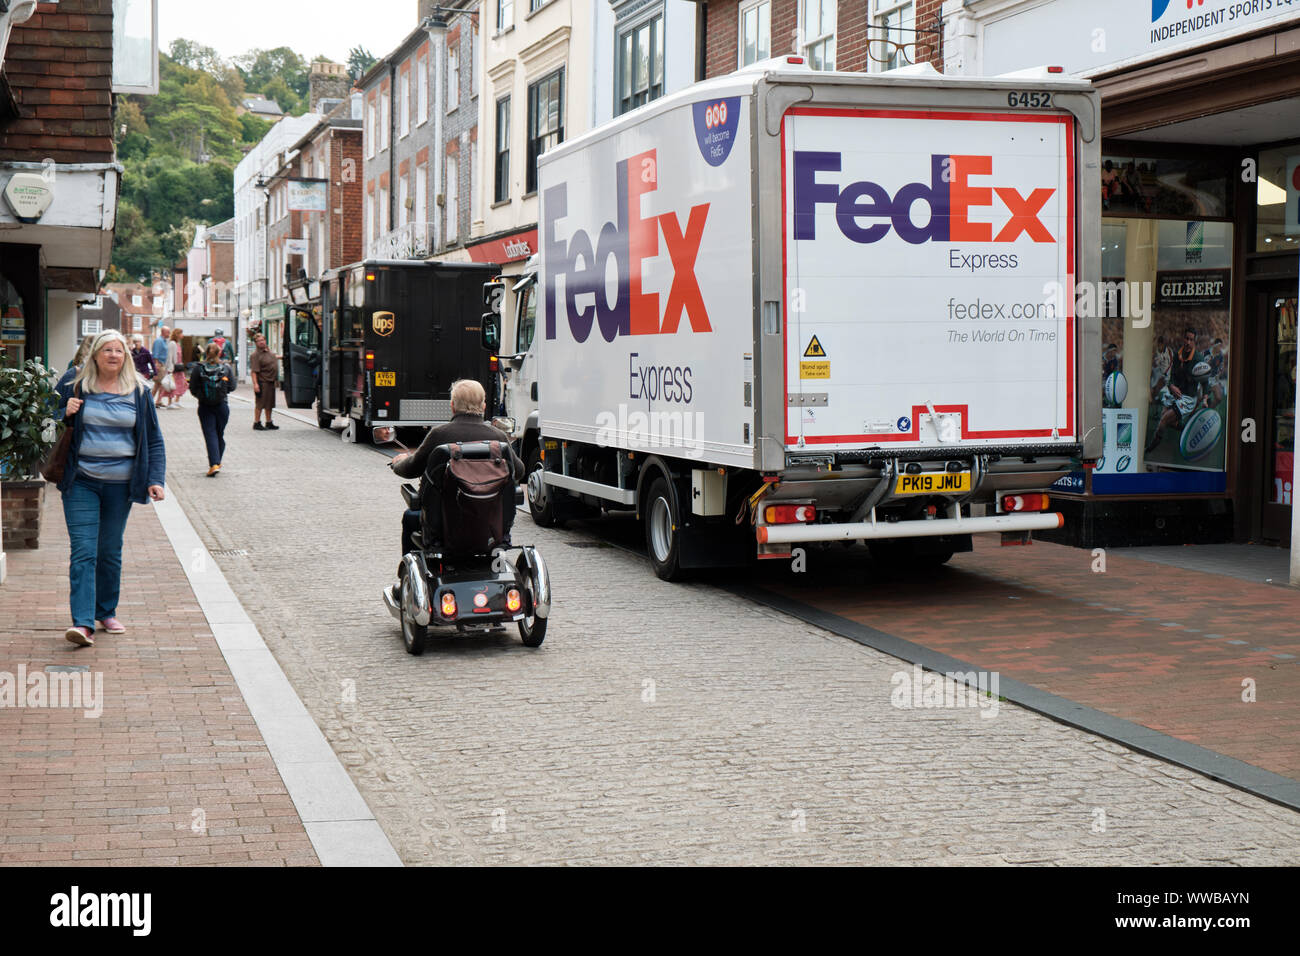 Fedex and UPS delivery trucks parked illegally in pedestrian area of the town, while a reduced mobility person goes by on cobblestone street. Lewes UK Stock Photo